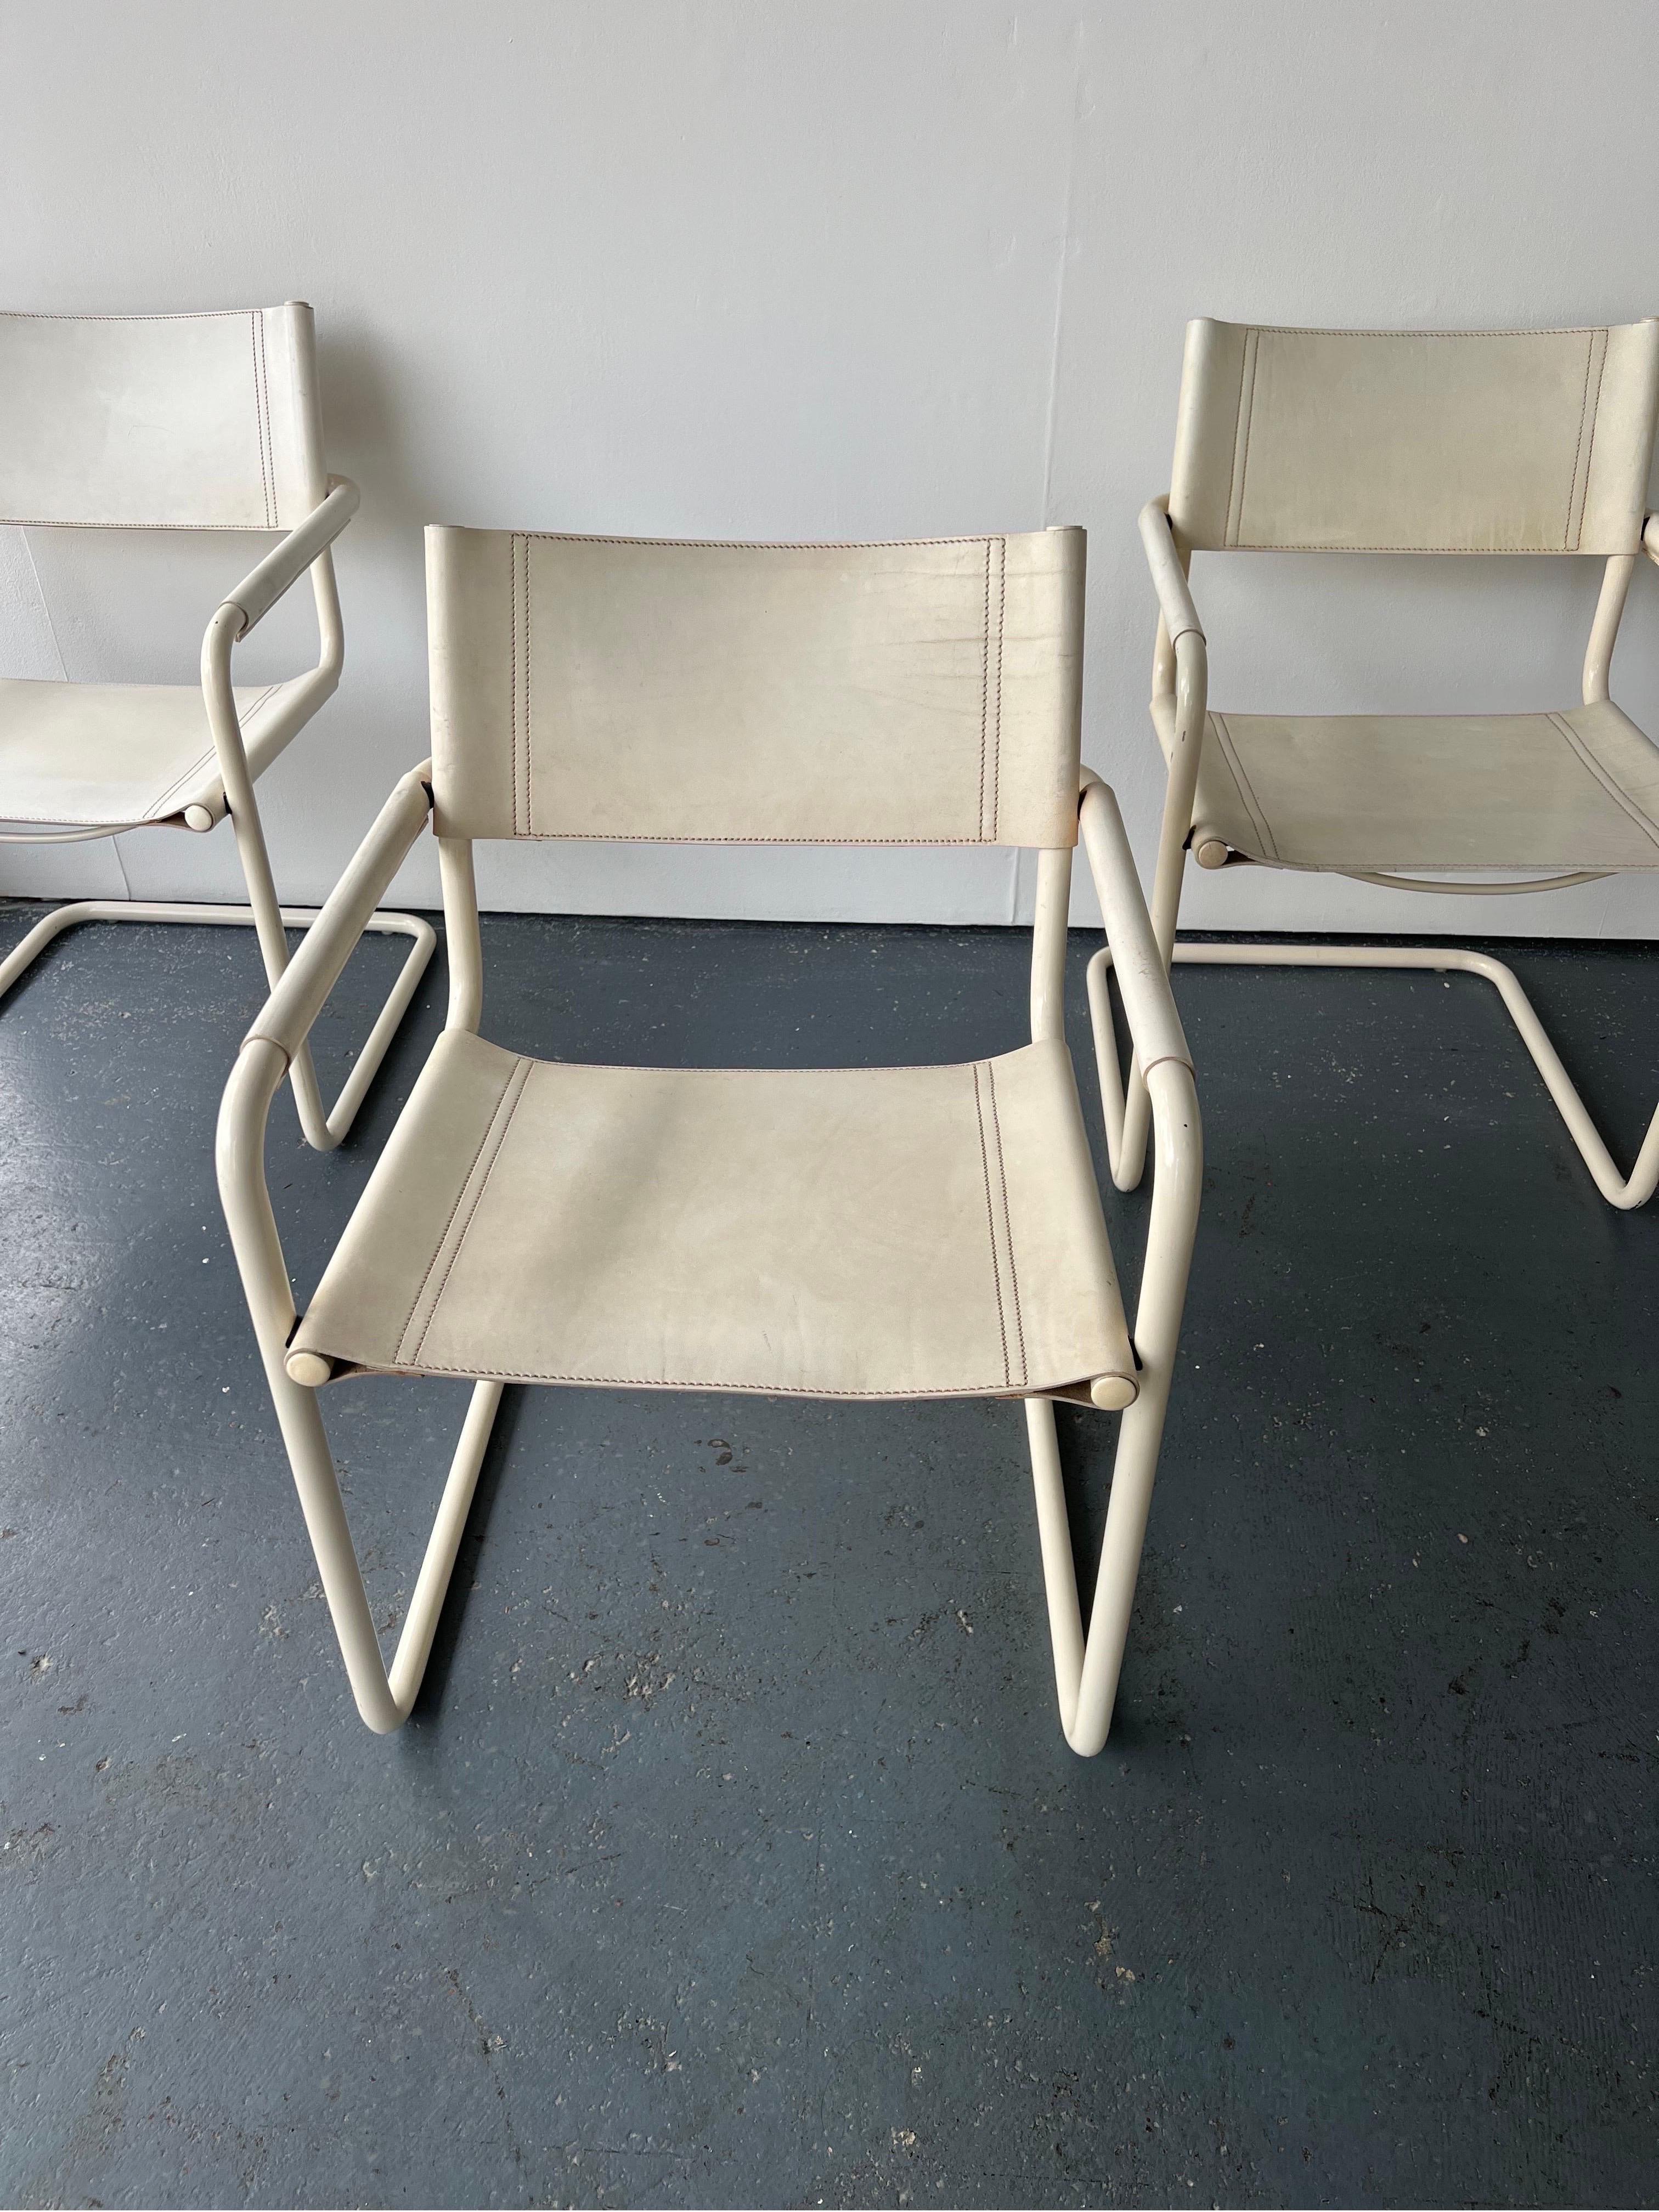 Set of 4 Cantilevered MG5 Dining Chairs Designed by Breuer Made by Matteo Grassi 1